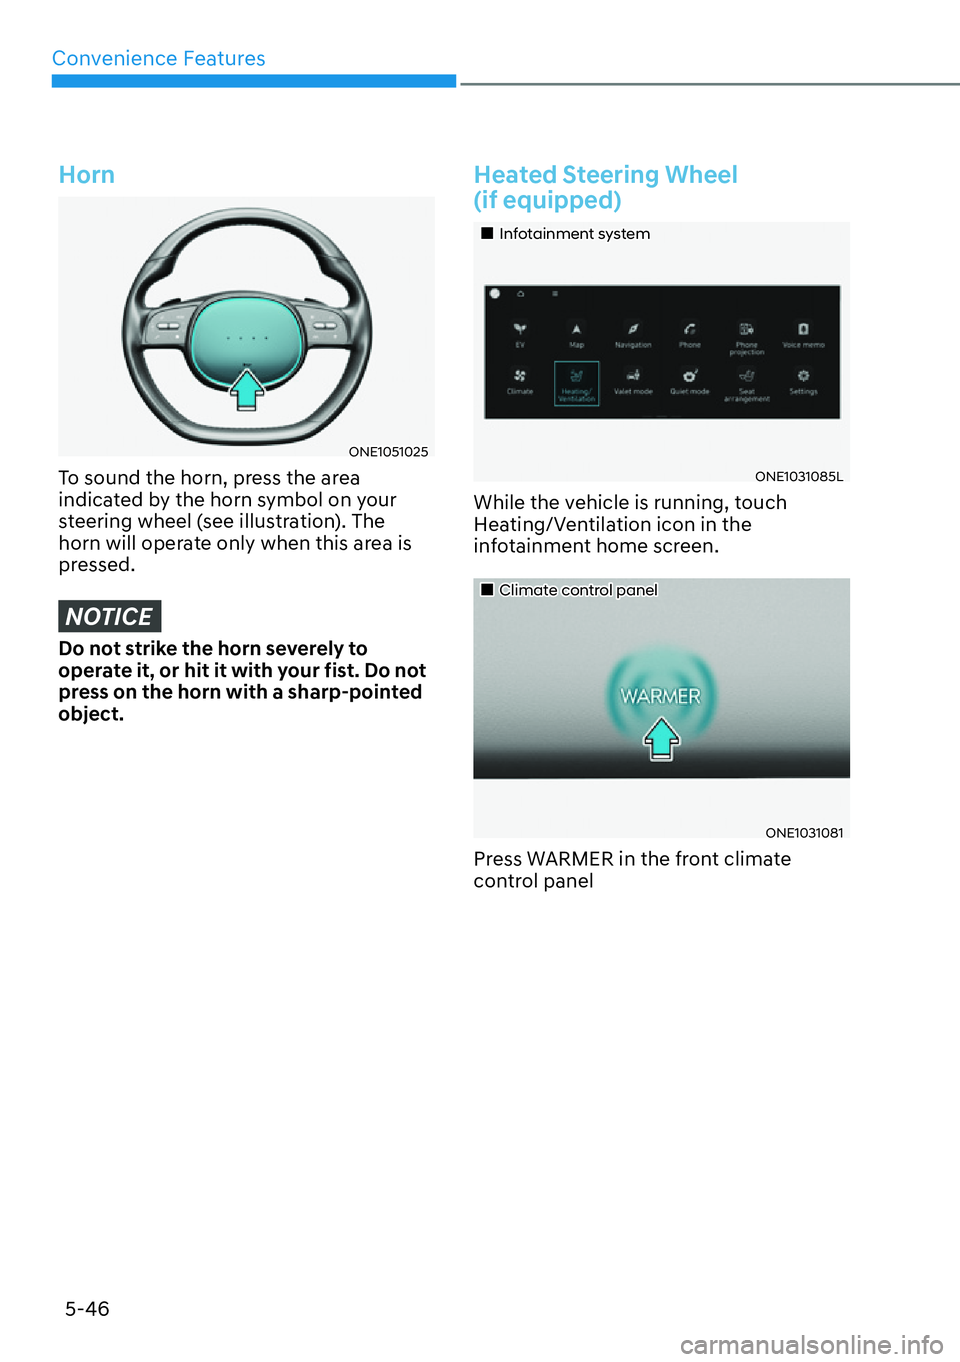 HYUNDAI IONIQ 5 2022  Owners Manual Convenience Features
5-46
Horn
ONE1051025
To sound the horn, press the area 
indicated by the horn symbol on your 
steering wheel (see illustration). The 
horn will operate only when this area is 
pre